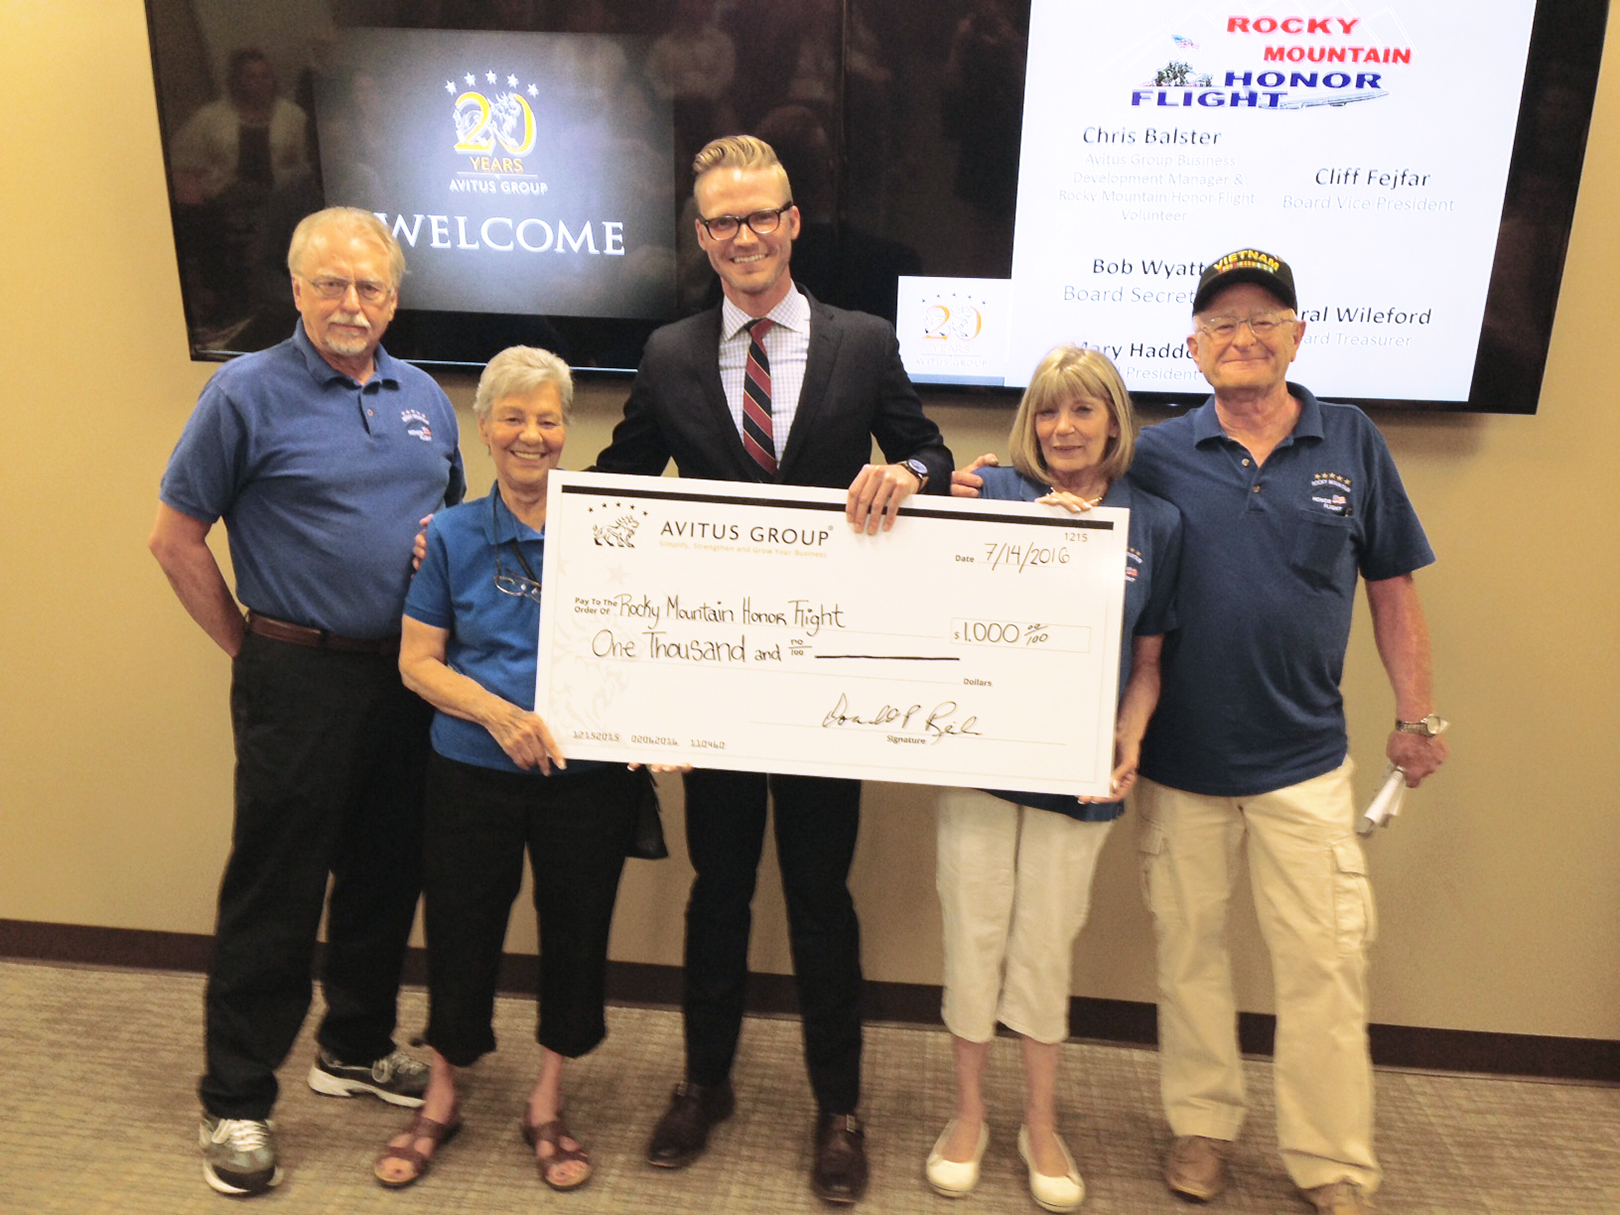 Avitus Group Business Development Manager & Honor Flight Volunteer Chris Balster Presents Rocky Mountain Honor Flight Board of Directors with Check for Business Challenge